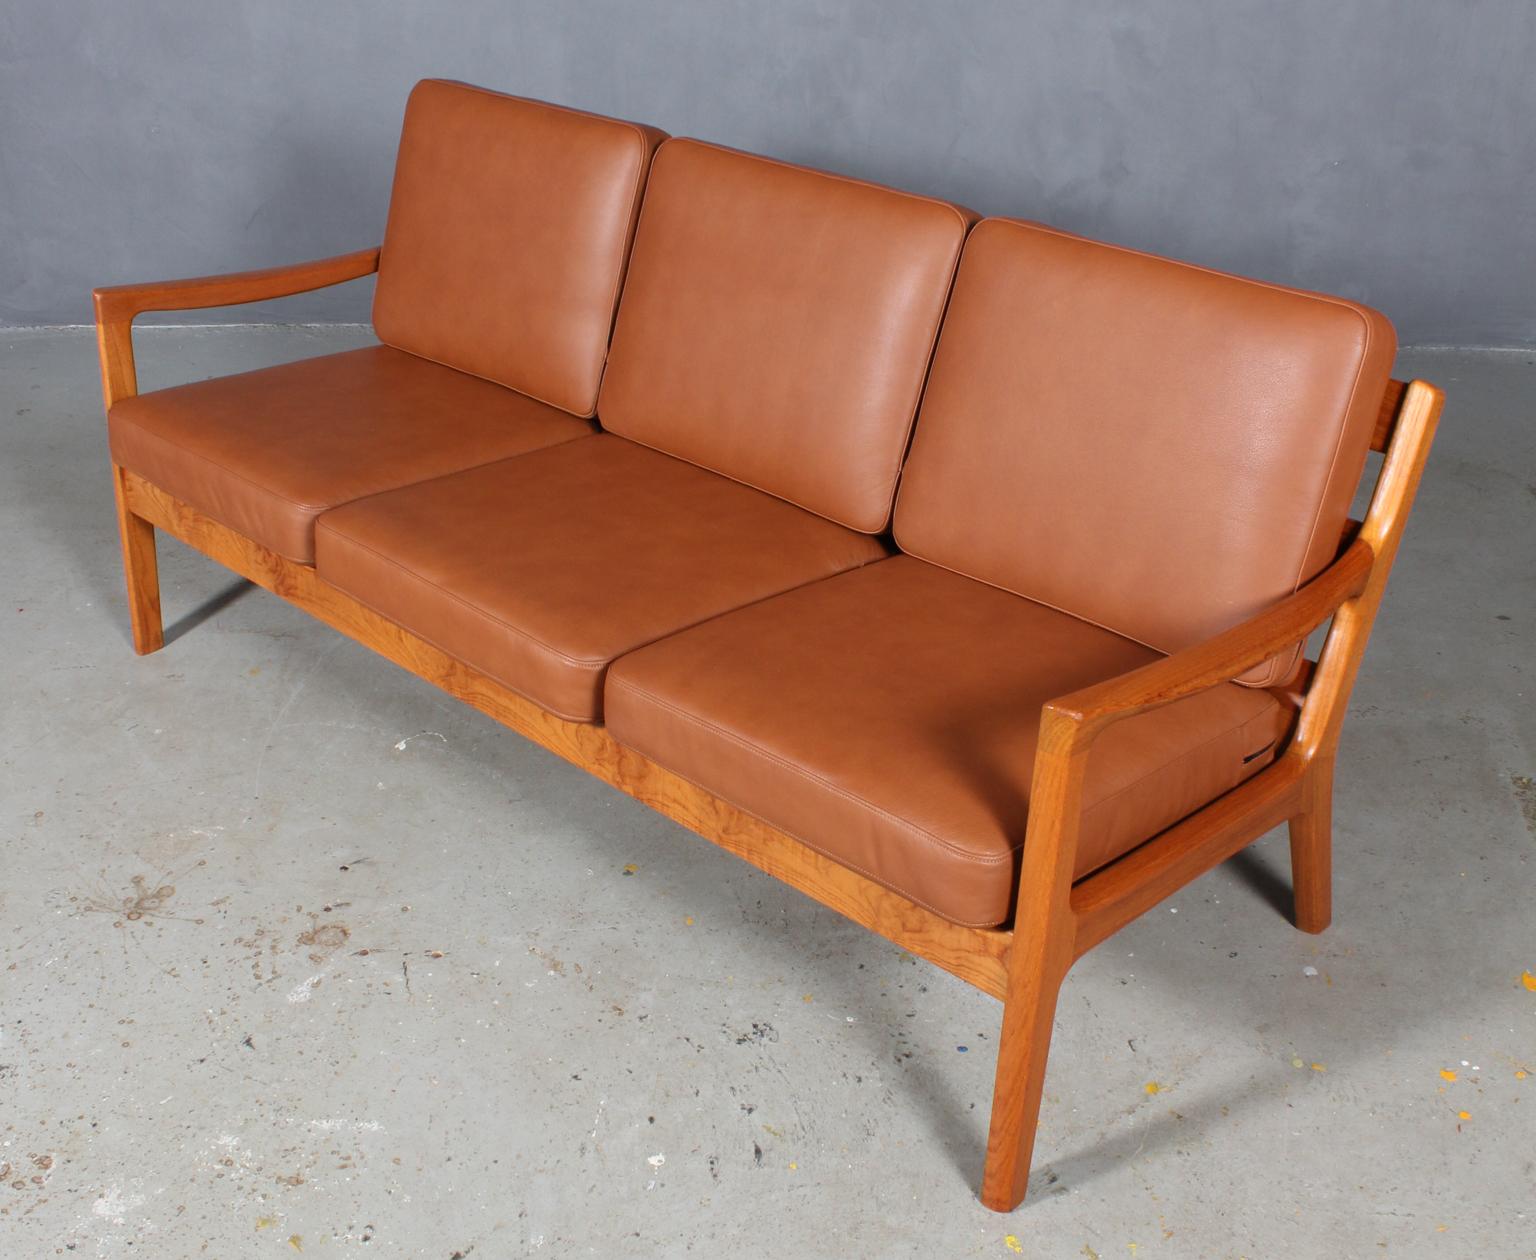 Ole Wanscher three-seat sofa new upholstered with tan aniline leather.

Made of solid teak.

Model senator, made by Cado.